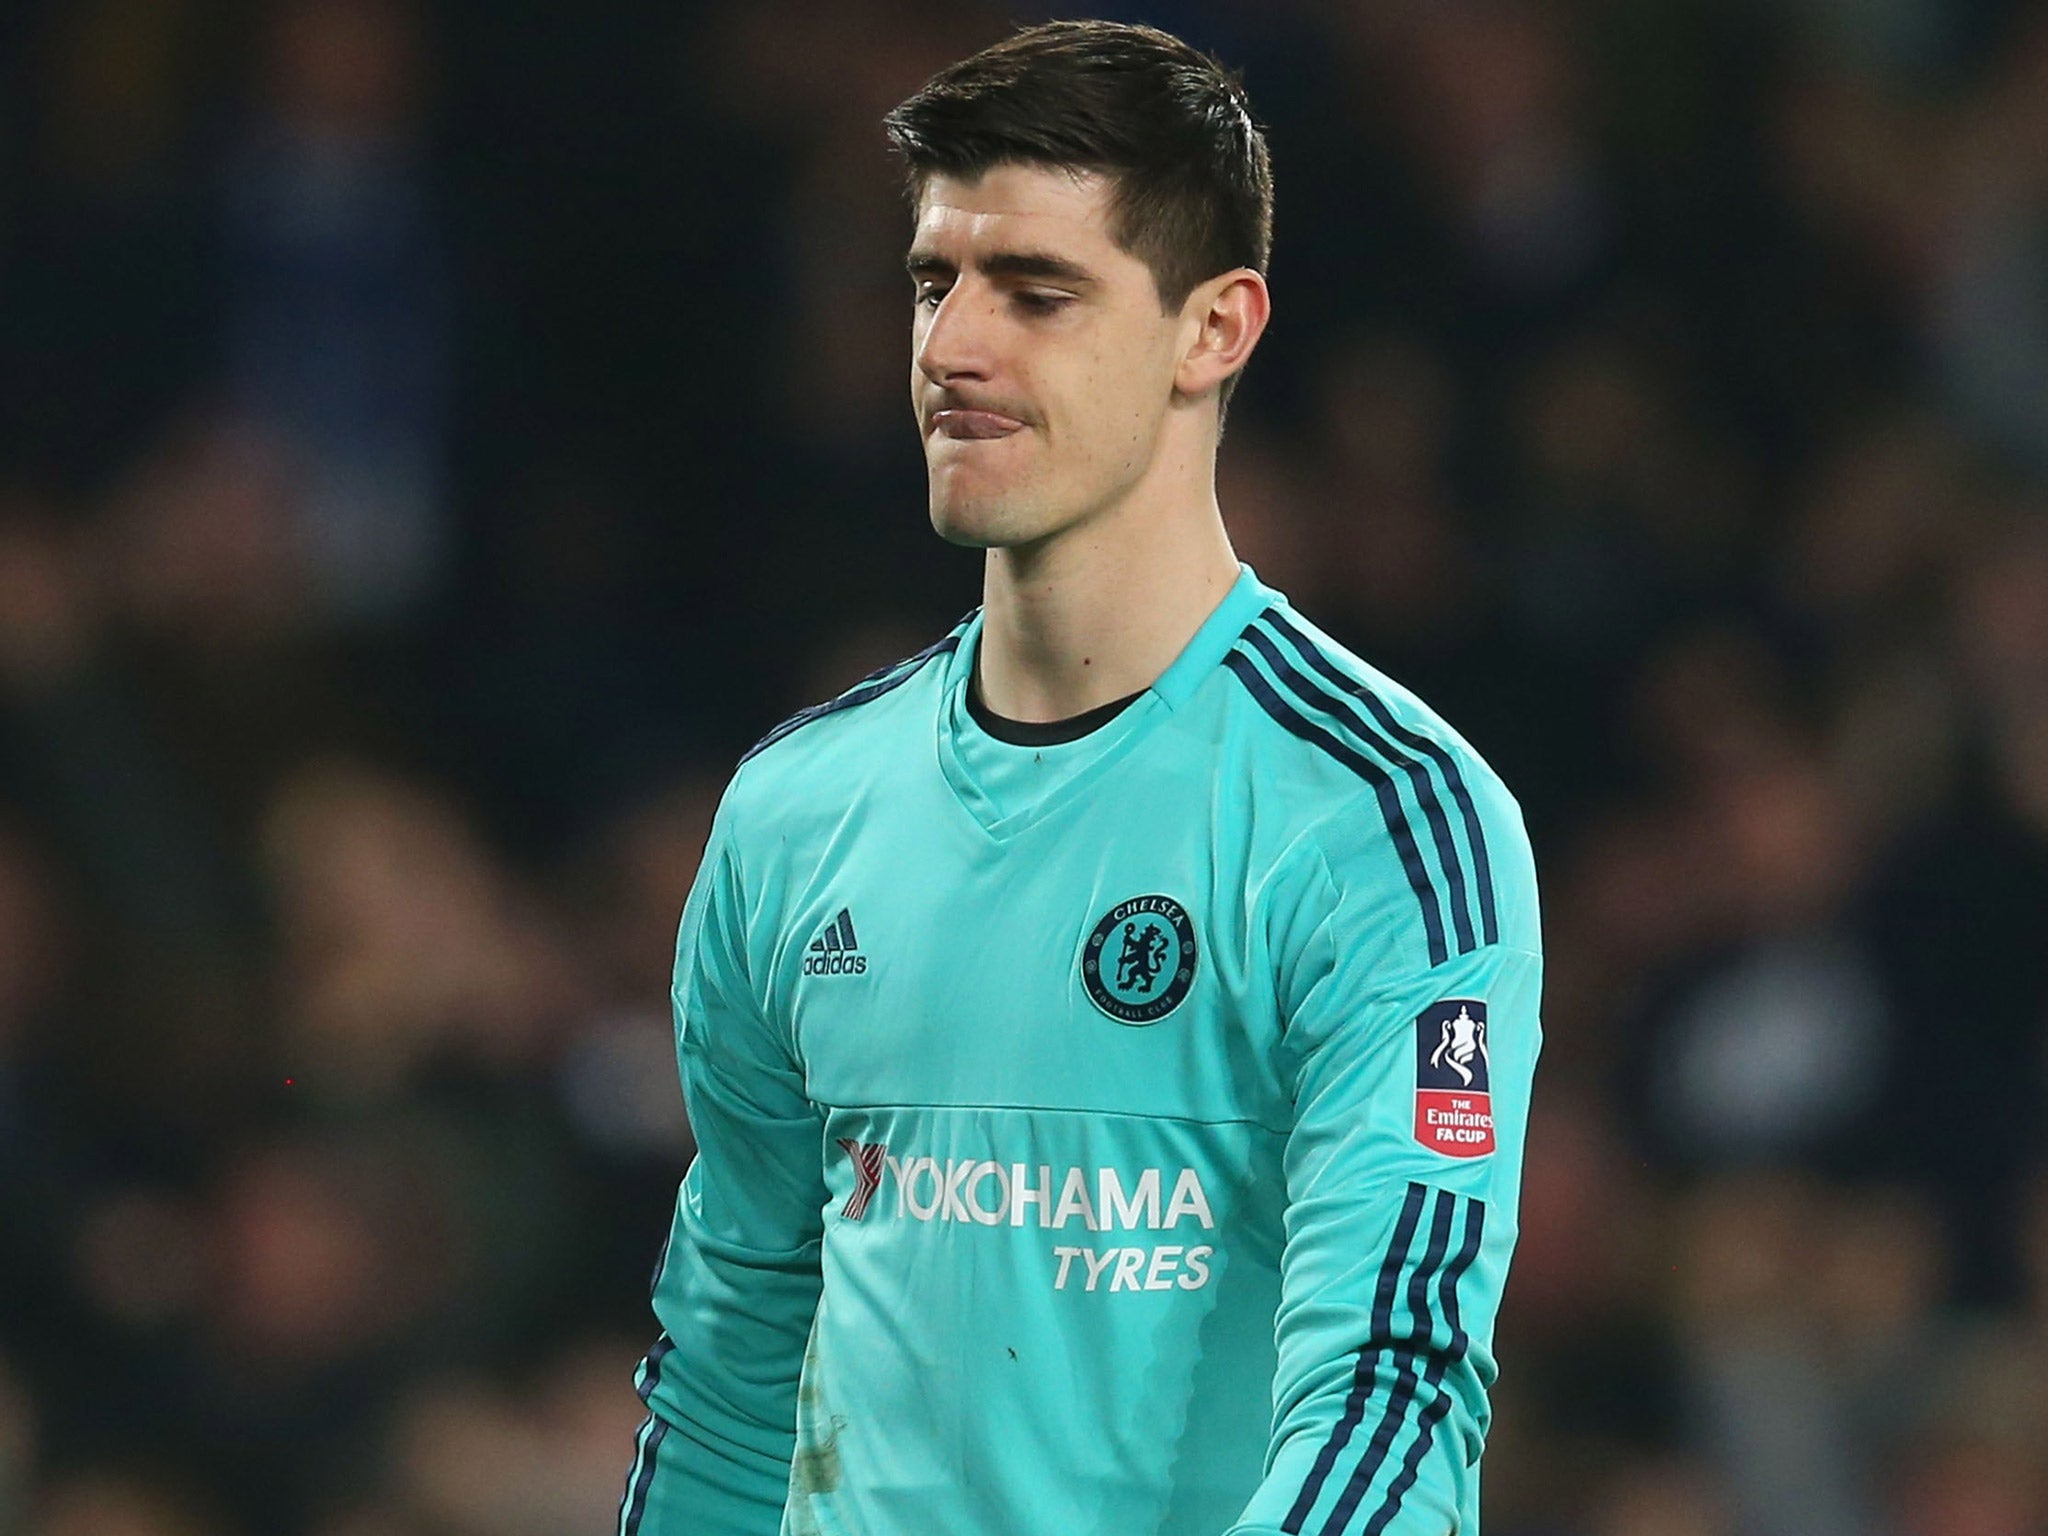 Thibaut Courtois is reported to have had a row with Chelsea coach Christophe Lollichon